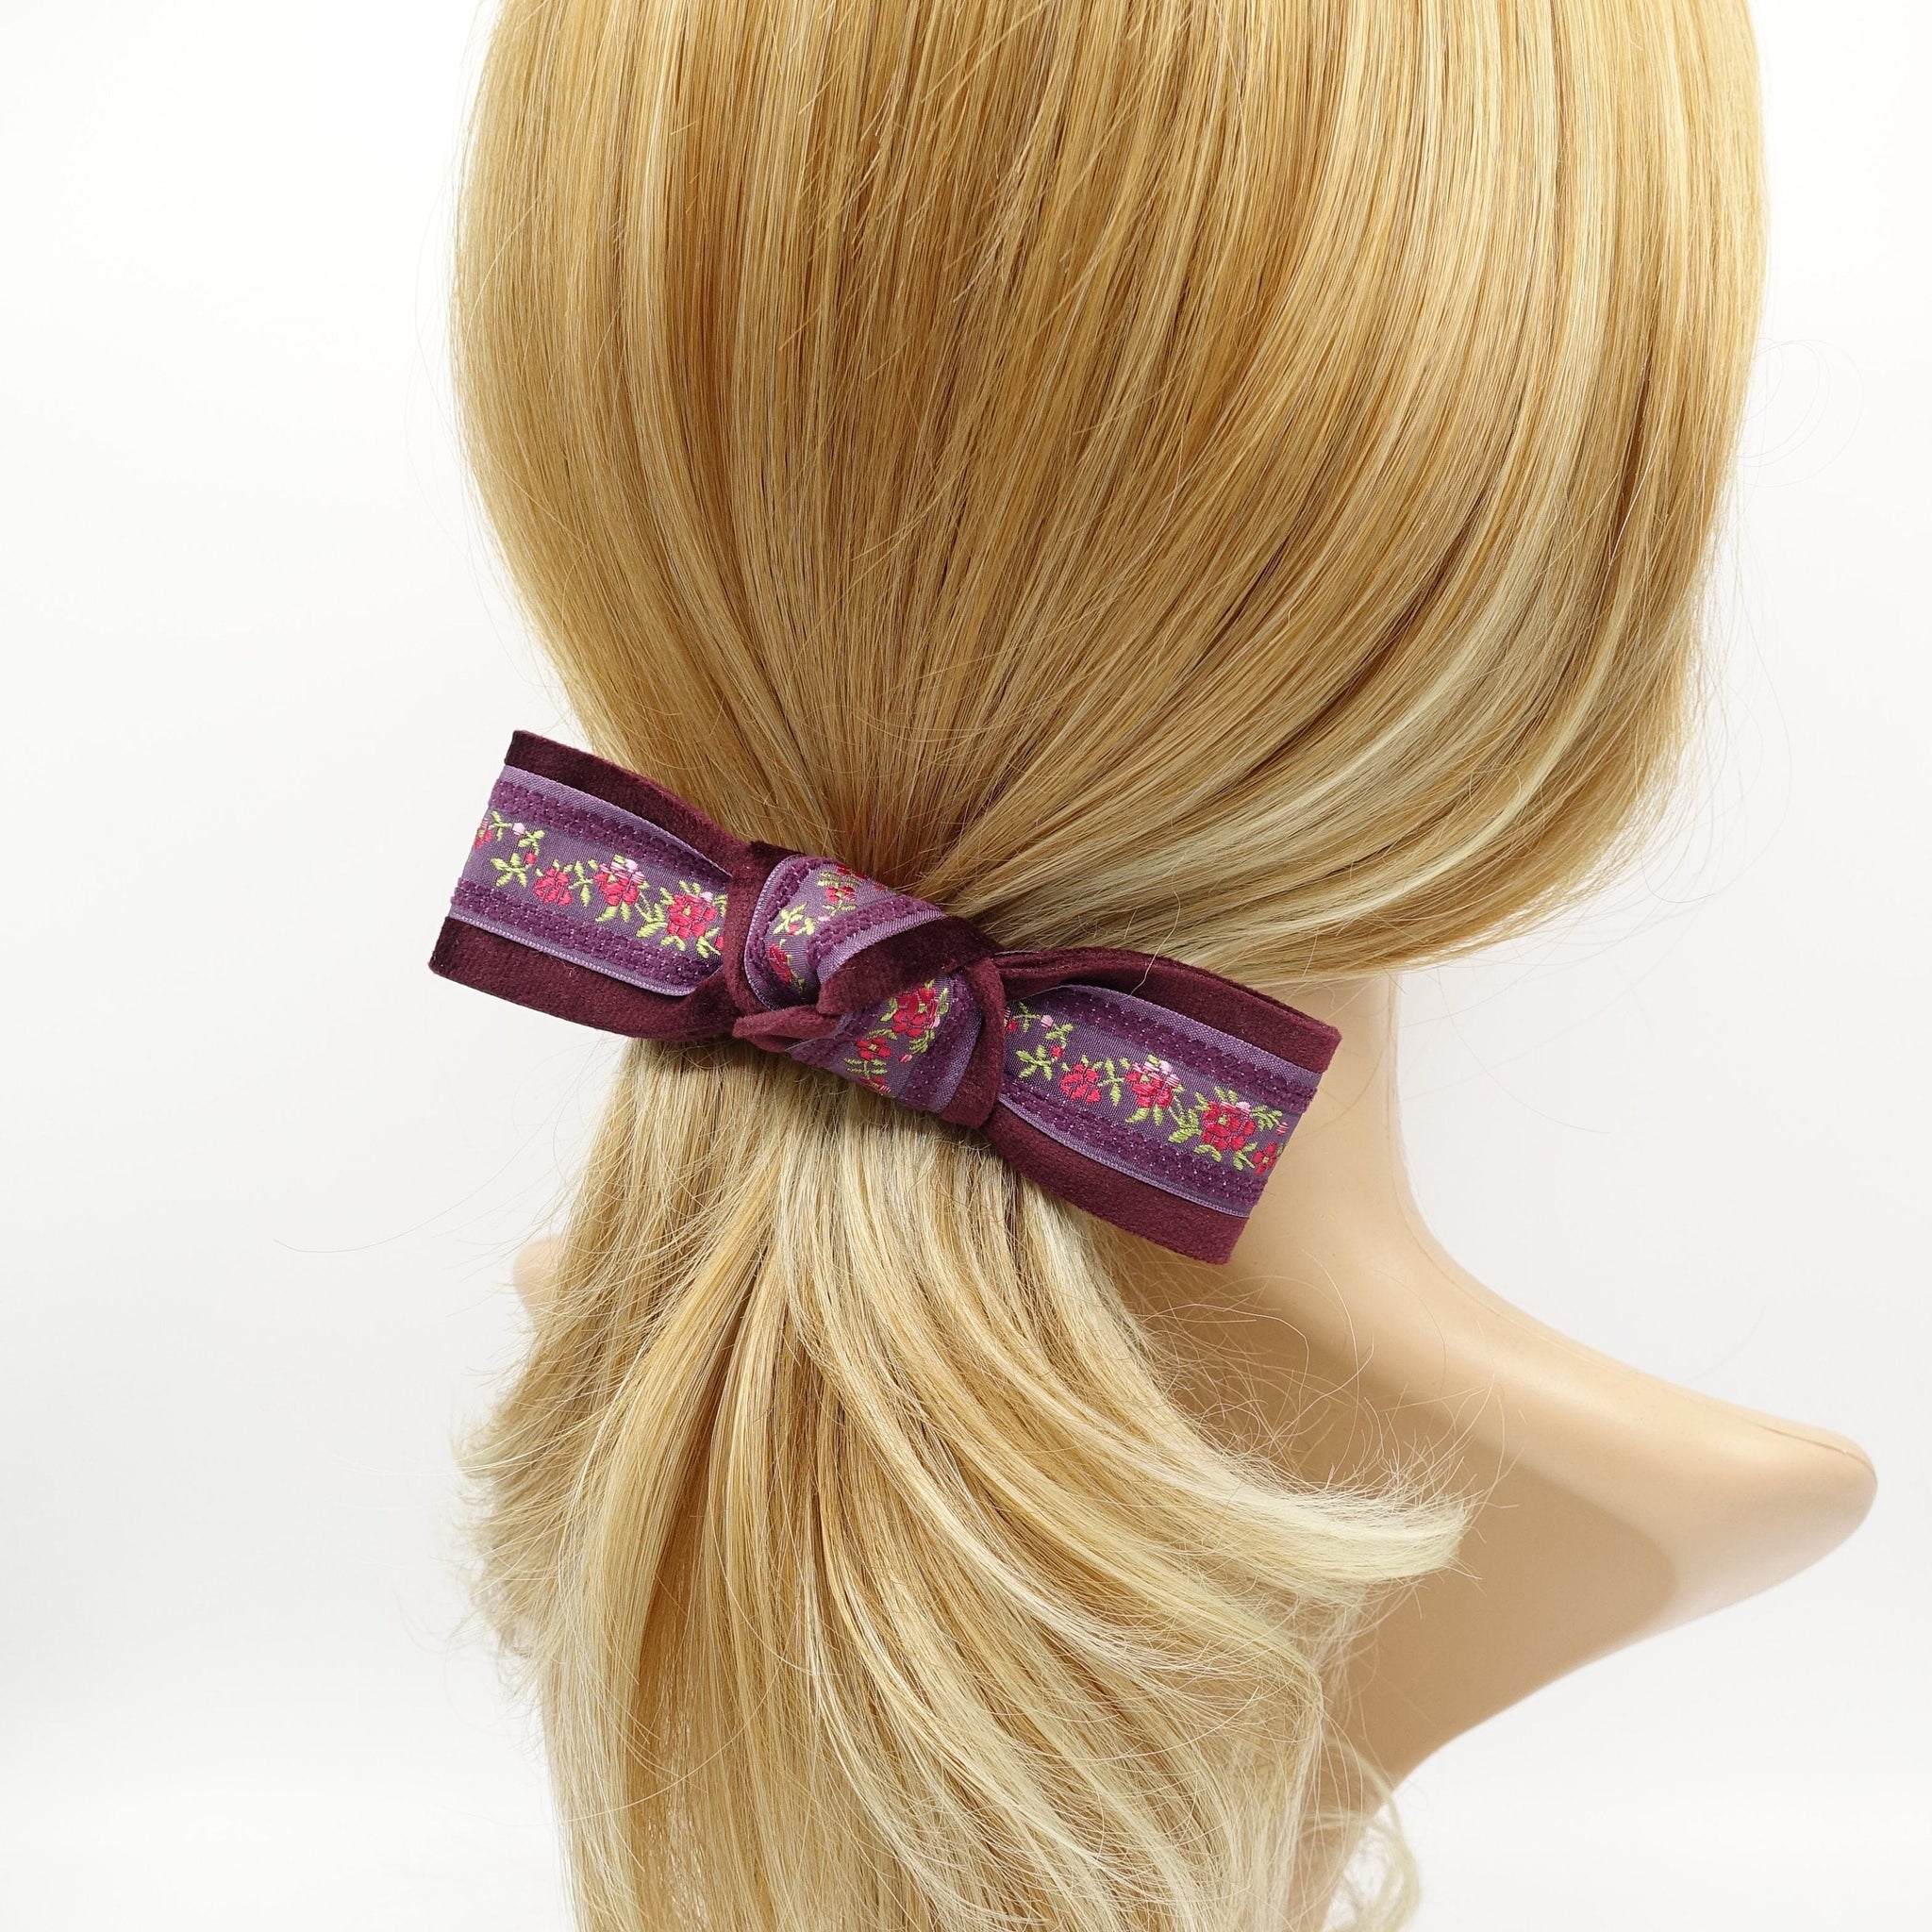 veryshine.com Barrettes & Clips Purple flower embroidery velvet layered knot hair bow luxury style hair accessory for women